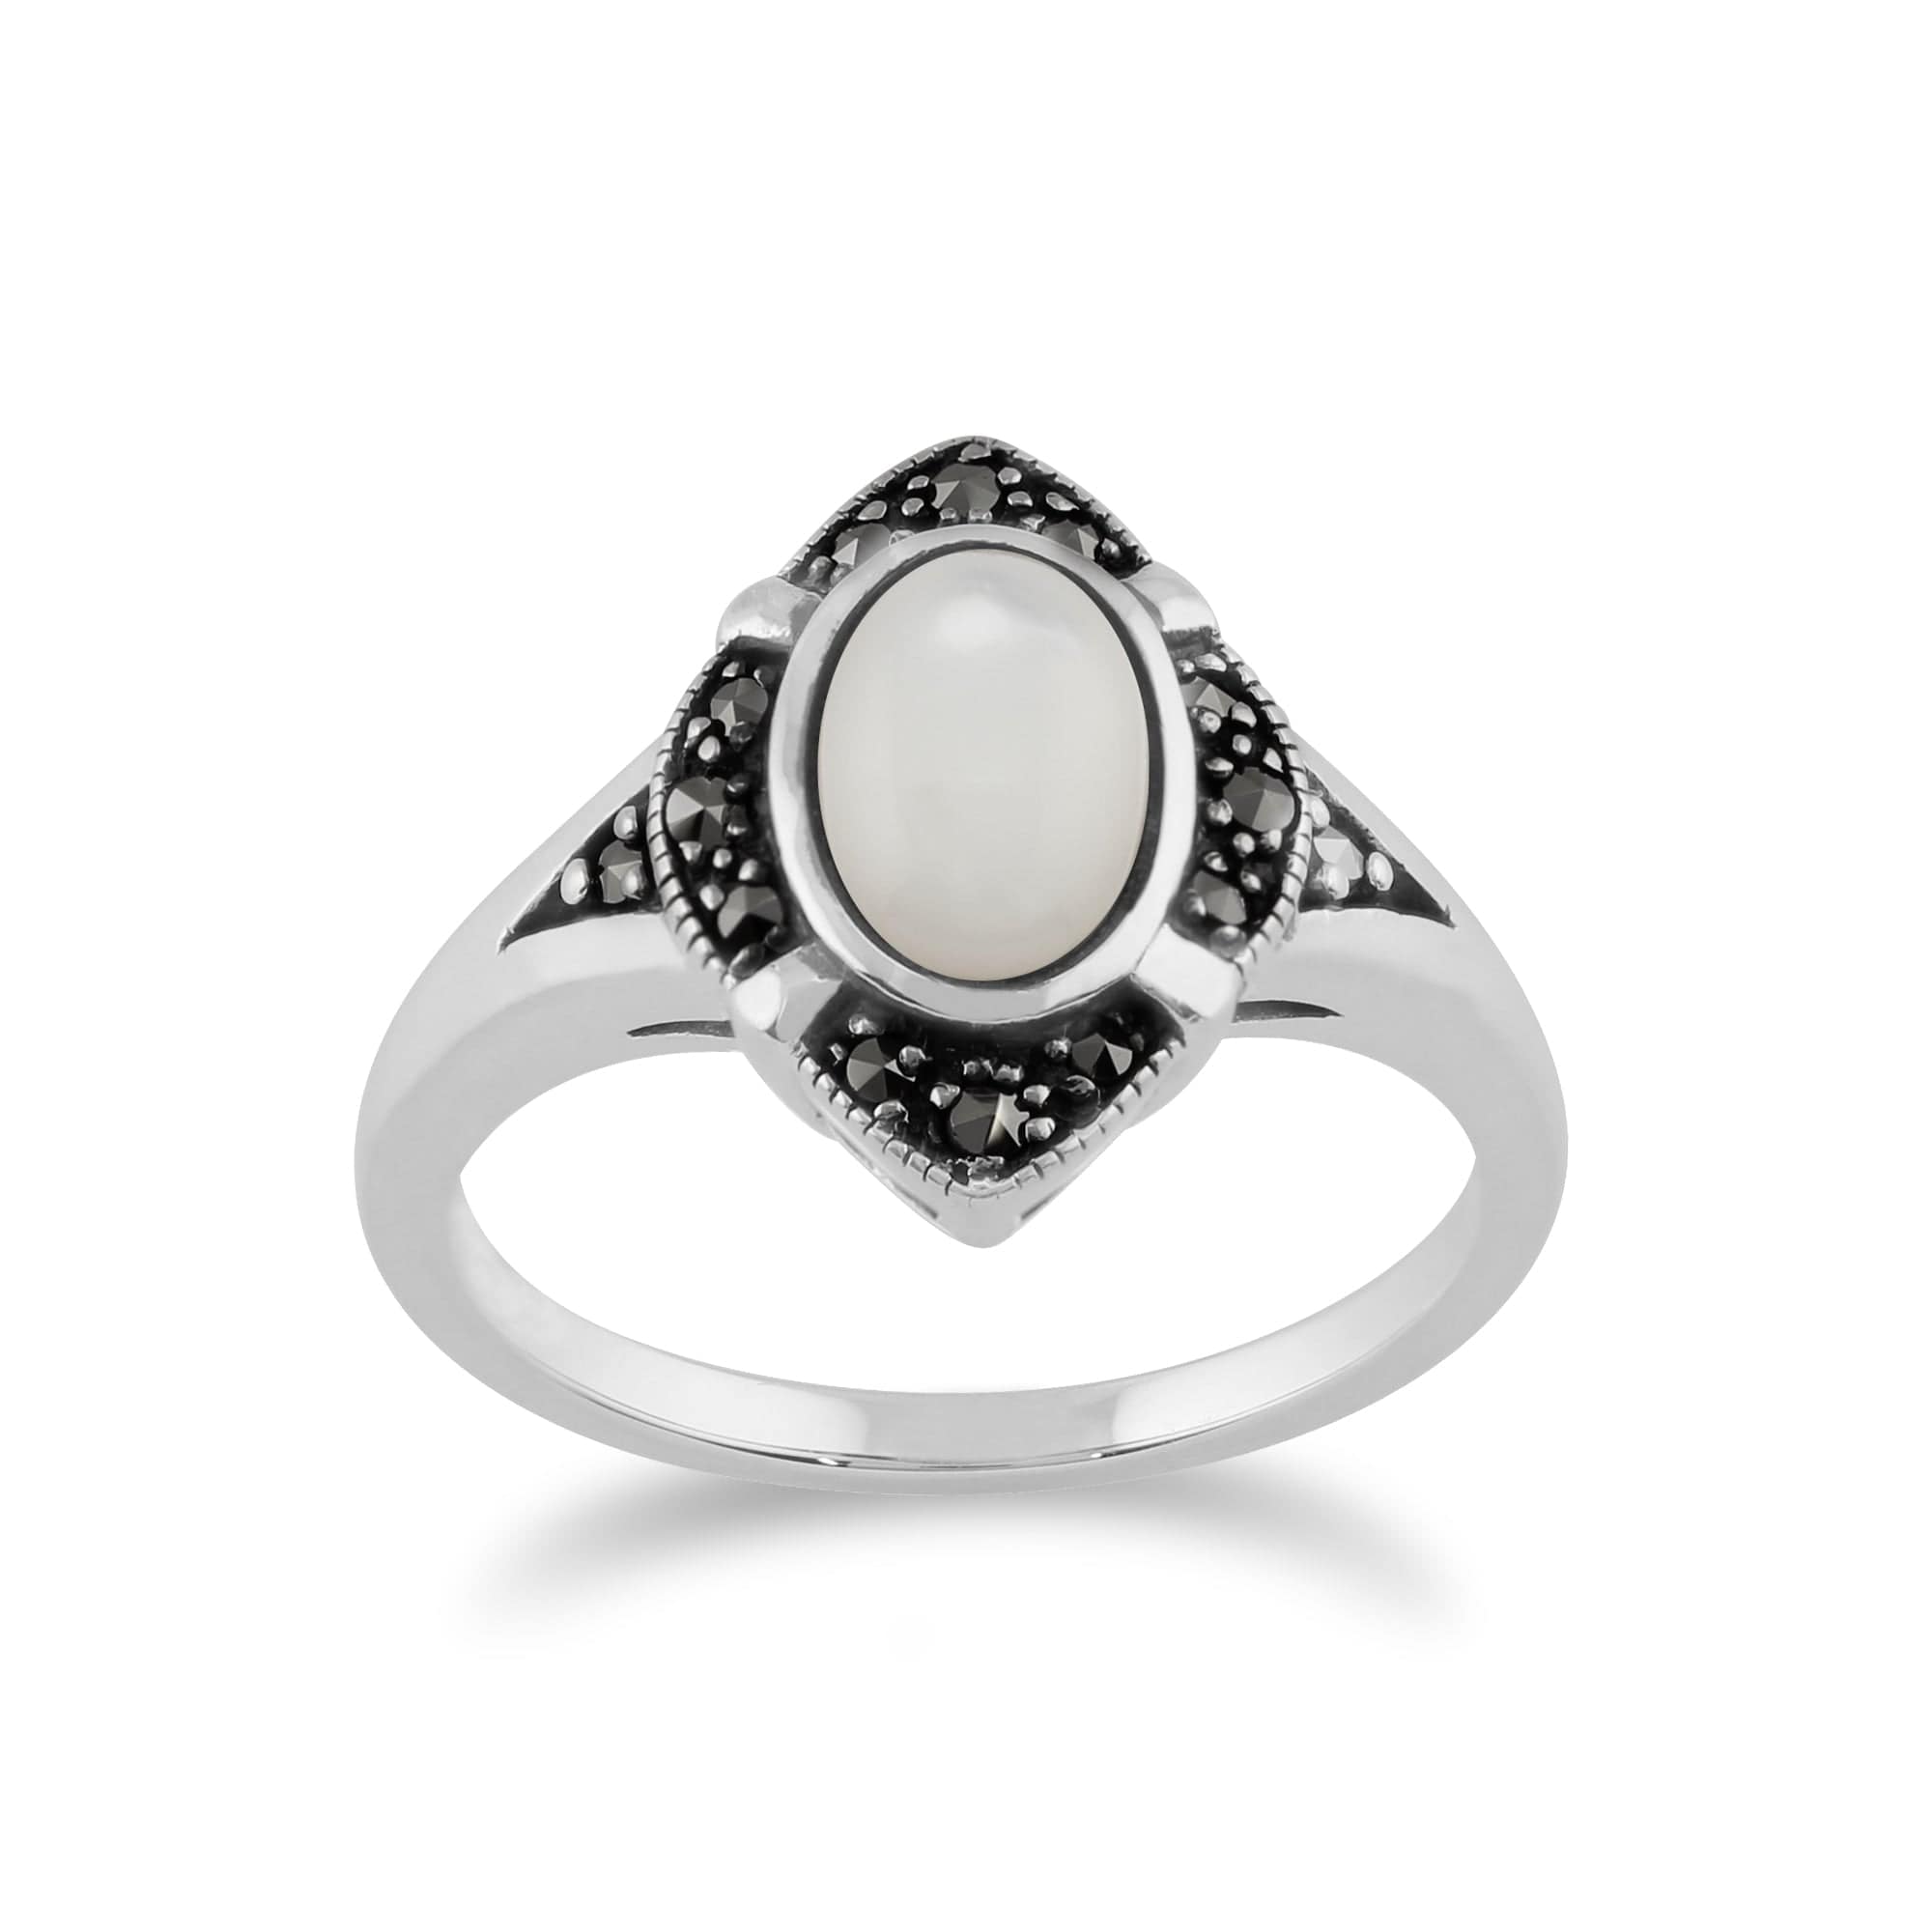 Gemondo 925 Sterling Silver 1.00ct Mother of Pearl & Marcasite Art Deco Ring Image 1